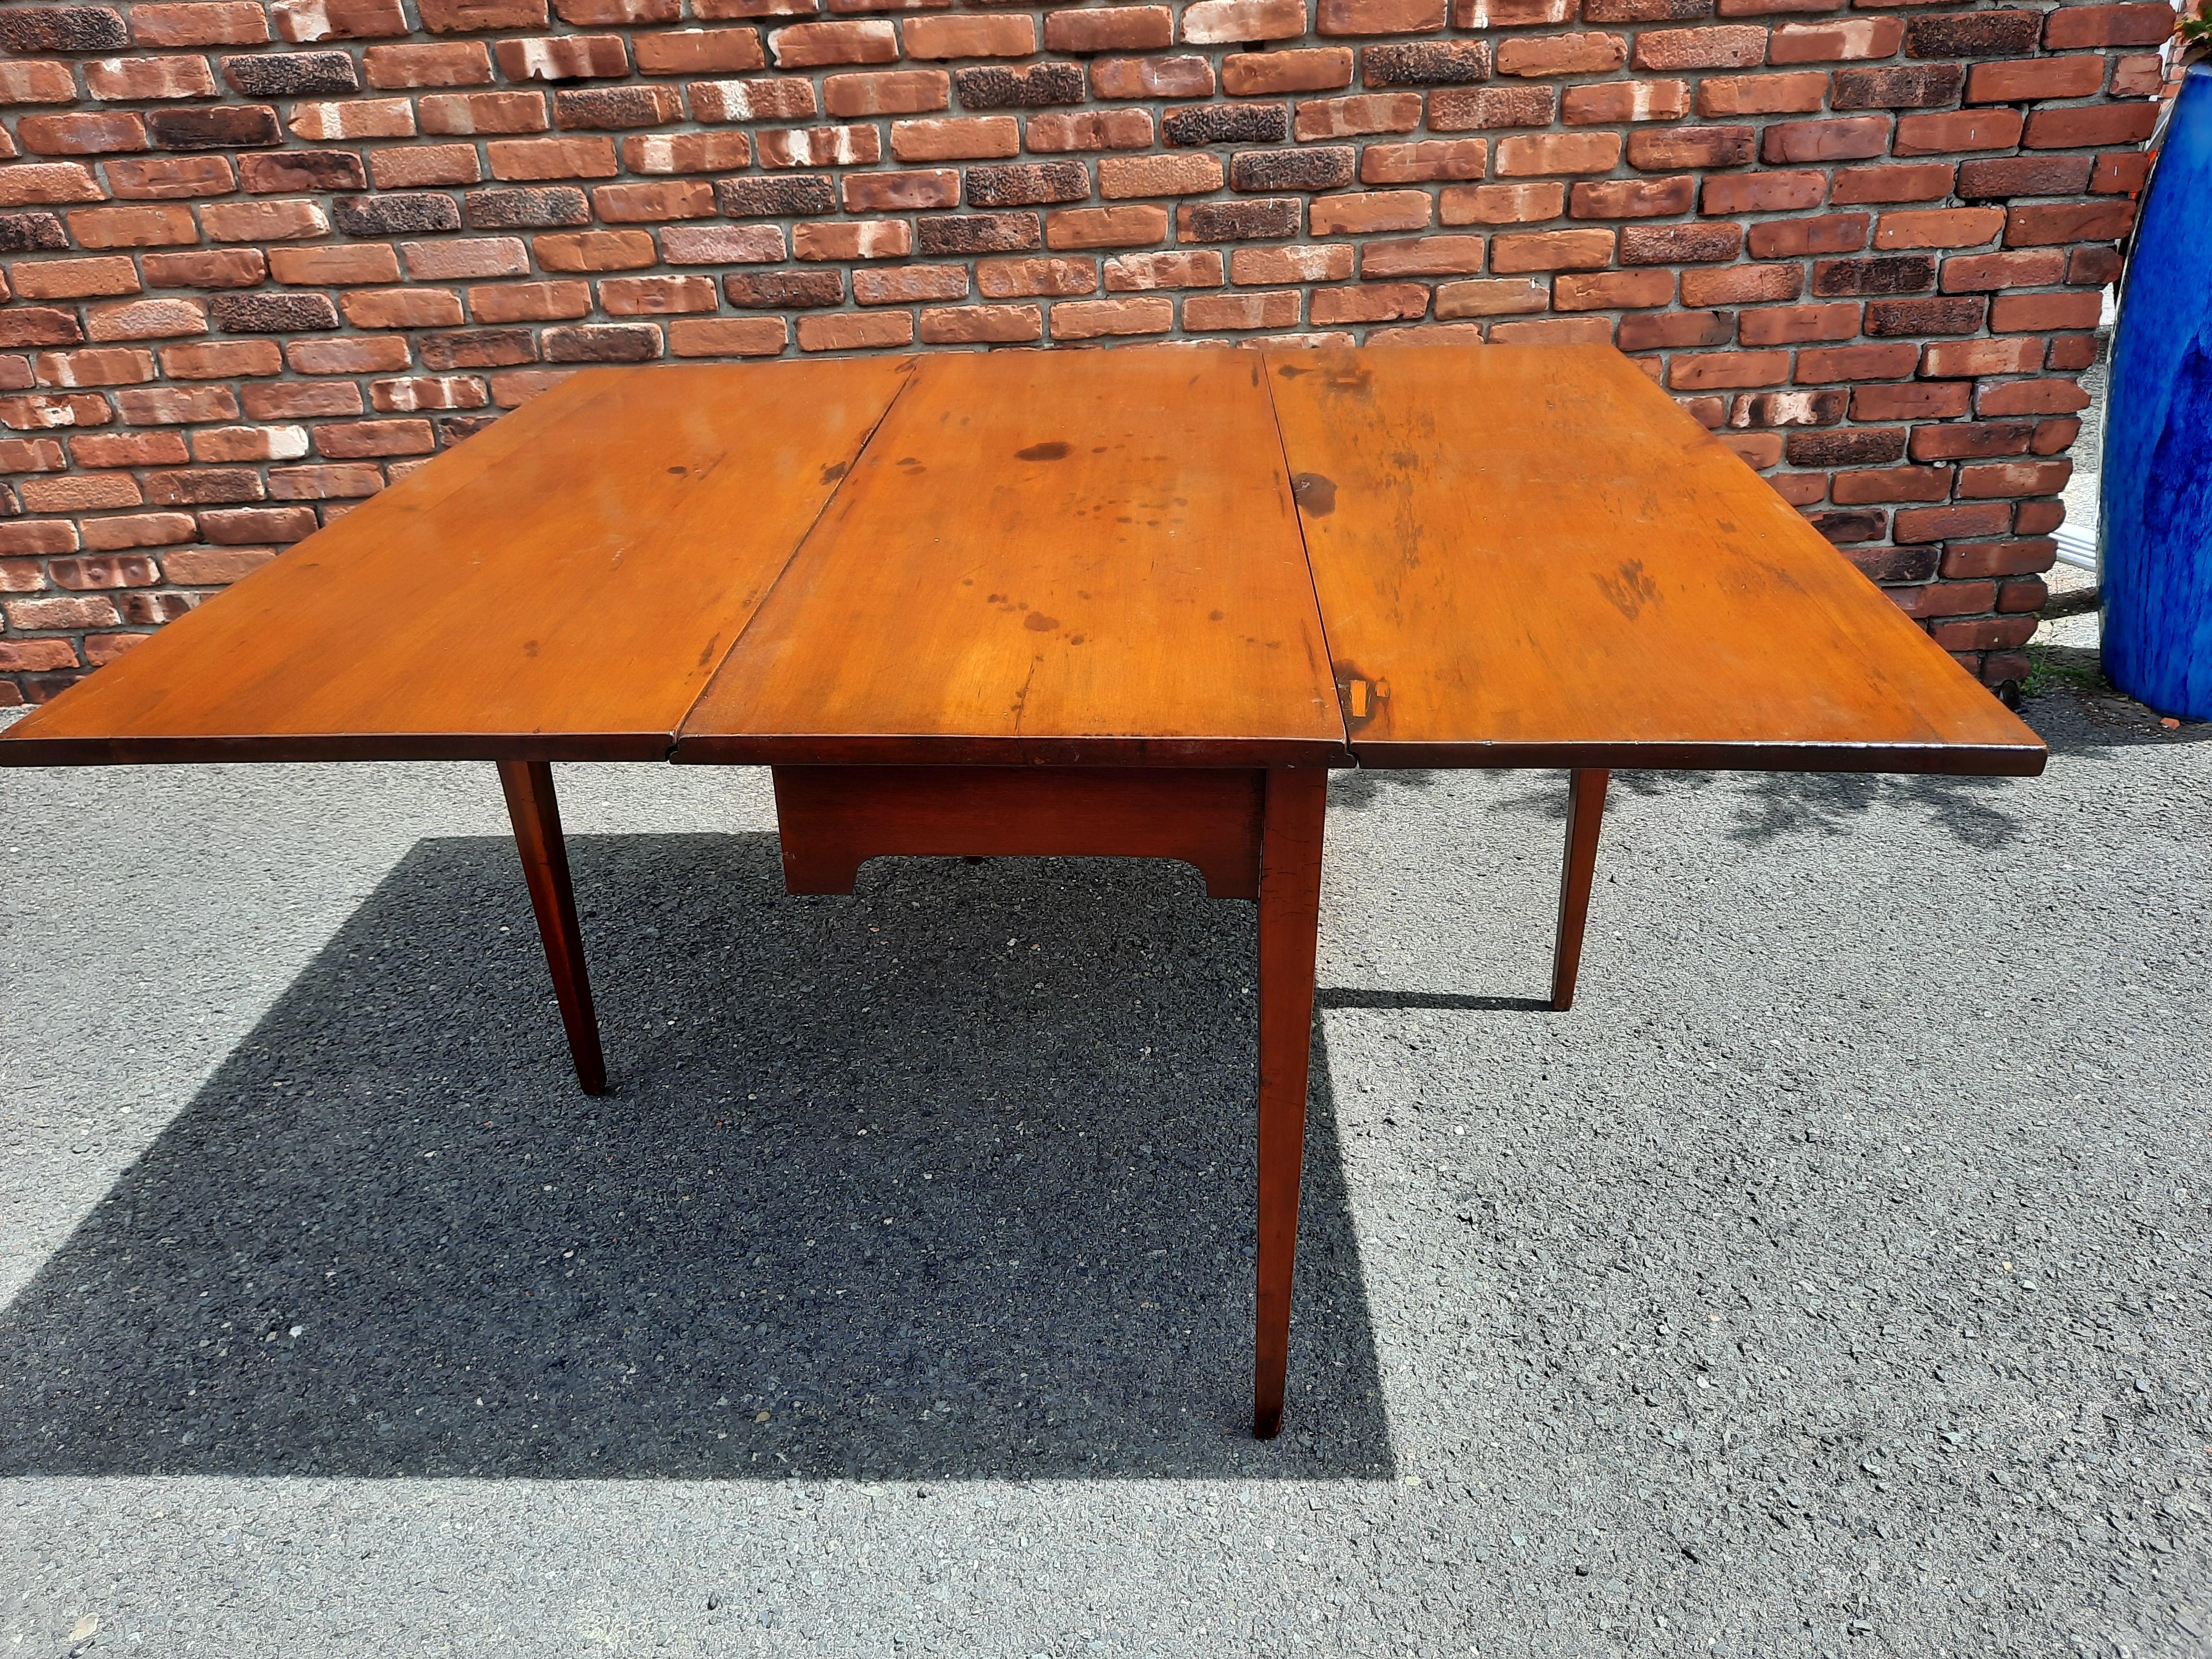 Antique solid hardwood drop leaf table with 2 gate legs that swing out to support the leaves when opened. The leaves do not have to be used at the same time. The table is very sturdy. Can also be used as a console table behind a sofa. Great space